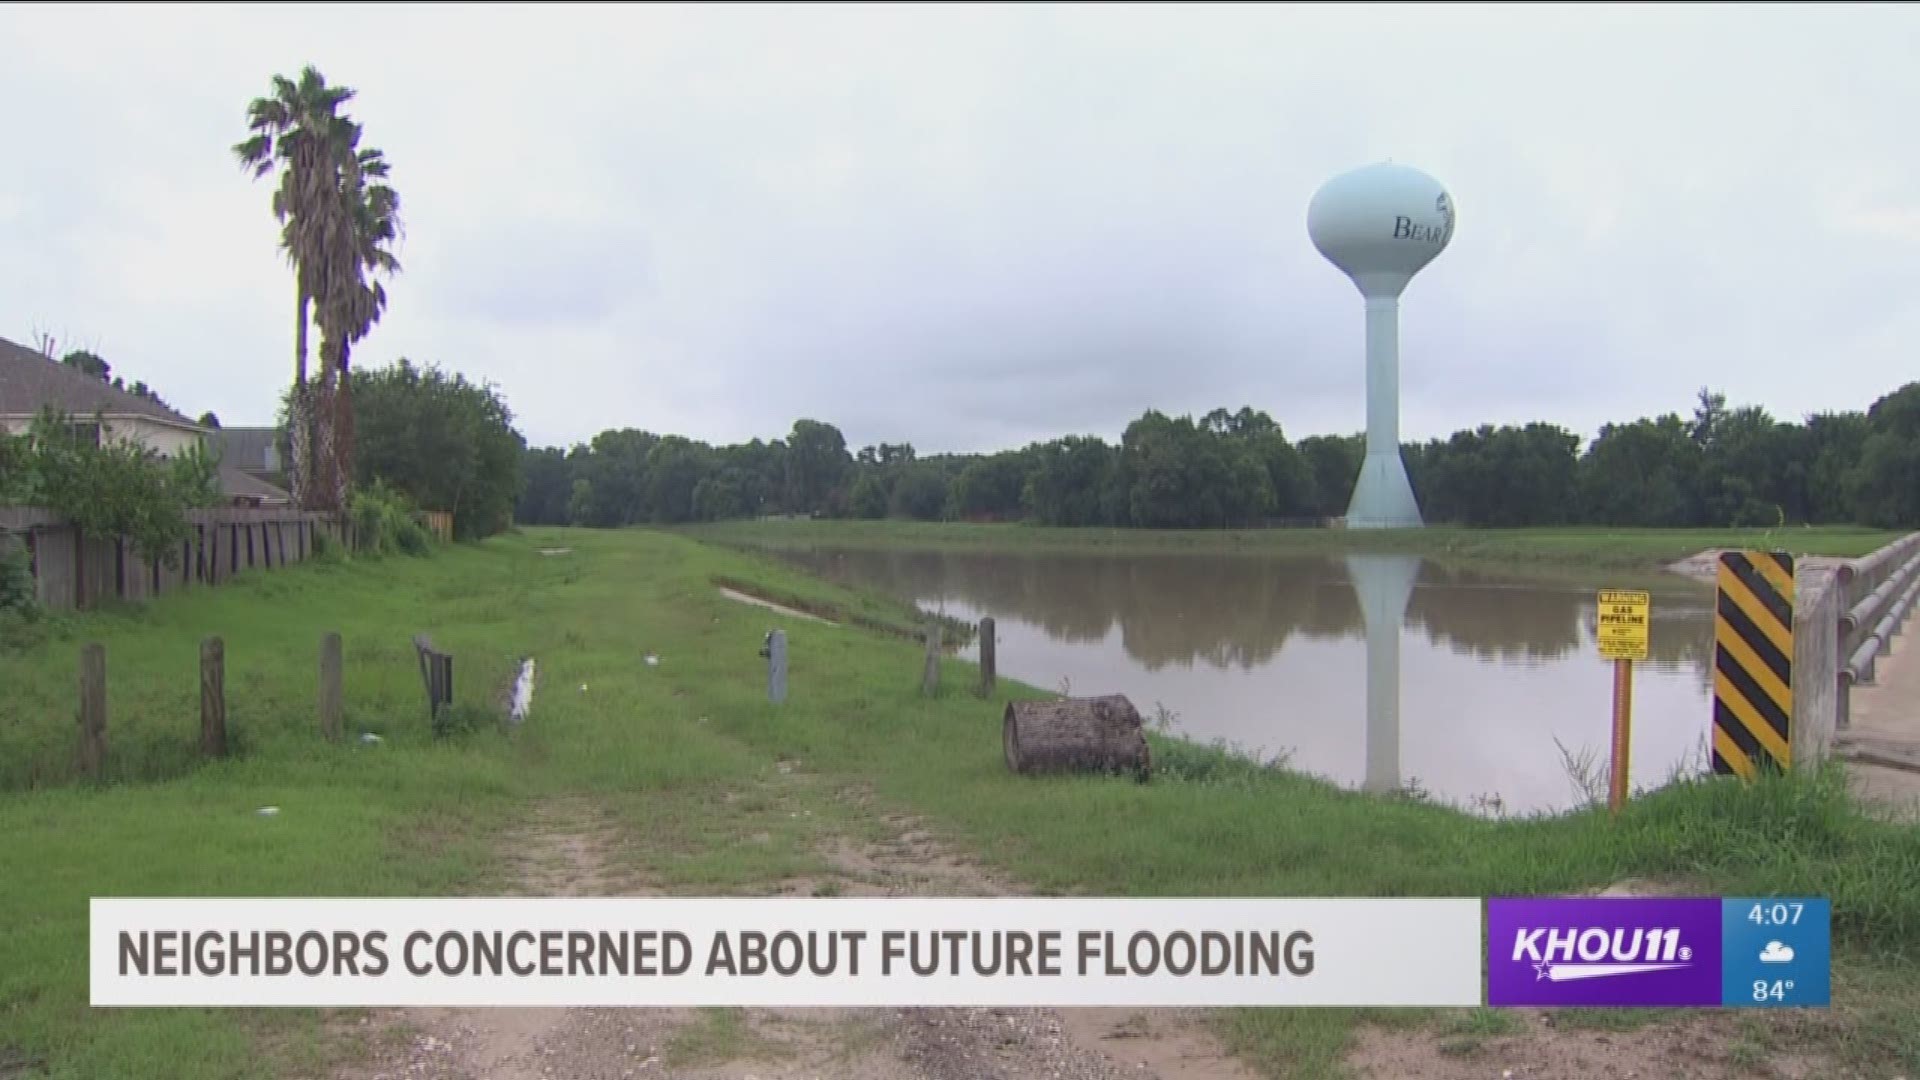 Residents in Bear Creek Village are concerned about future flooding after the heavy rain caused major street flooding in the area this week. 